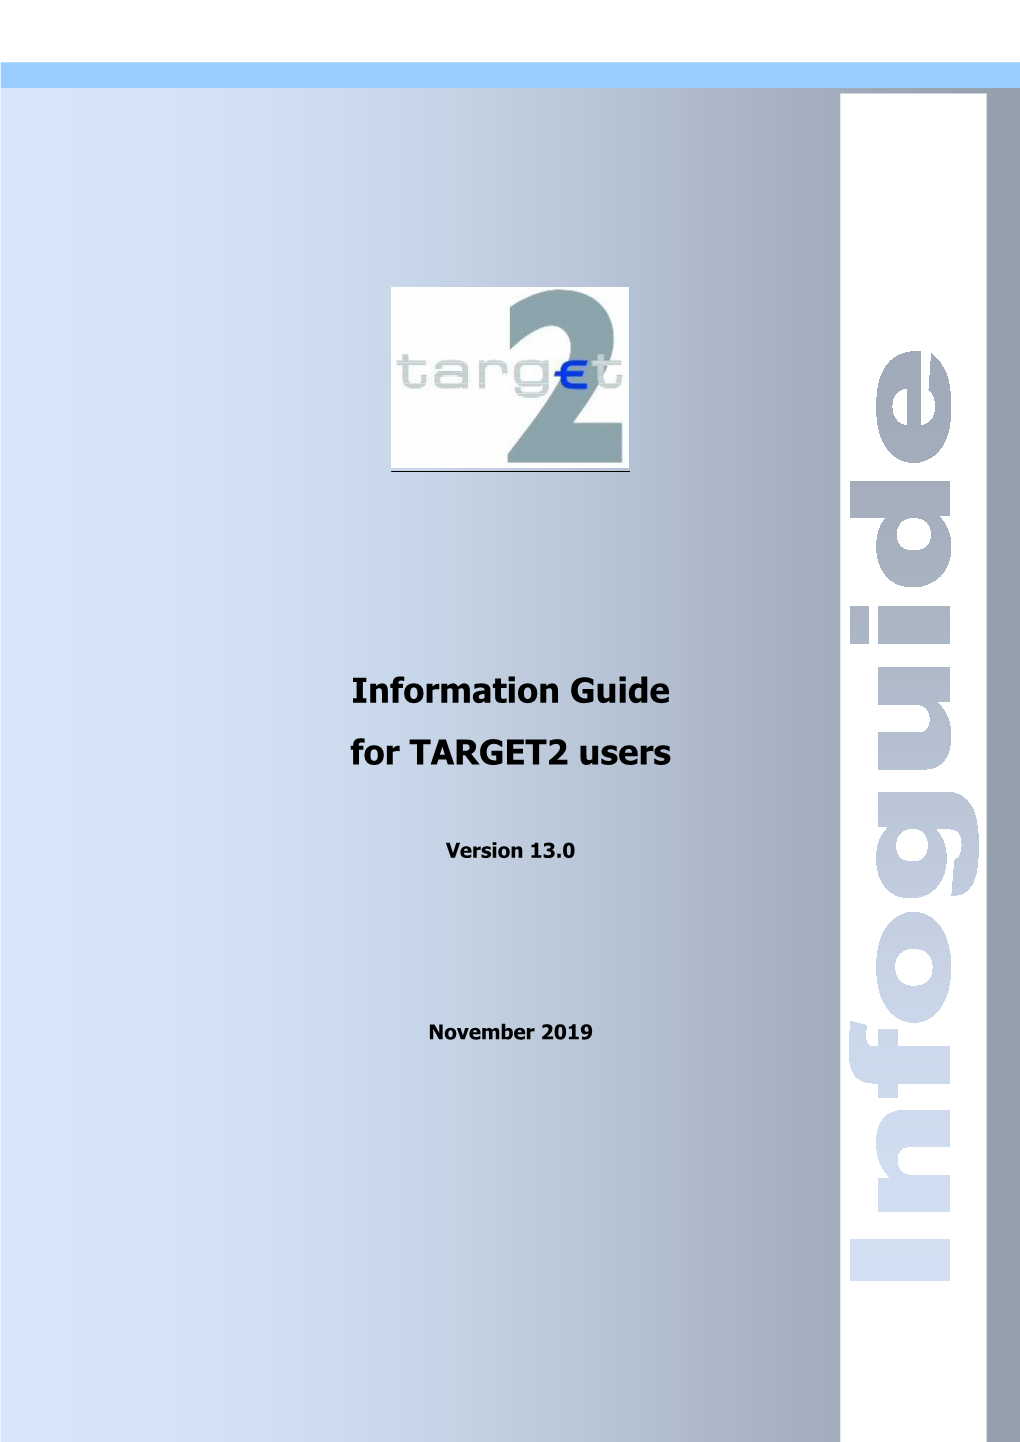 Information Guide for TARGET2 Users Version 13.0